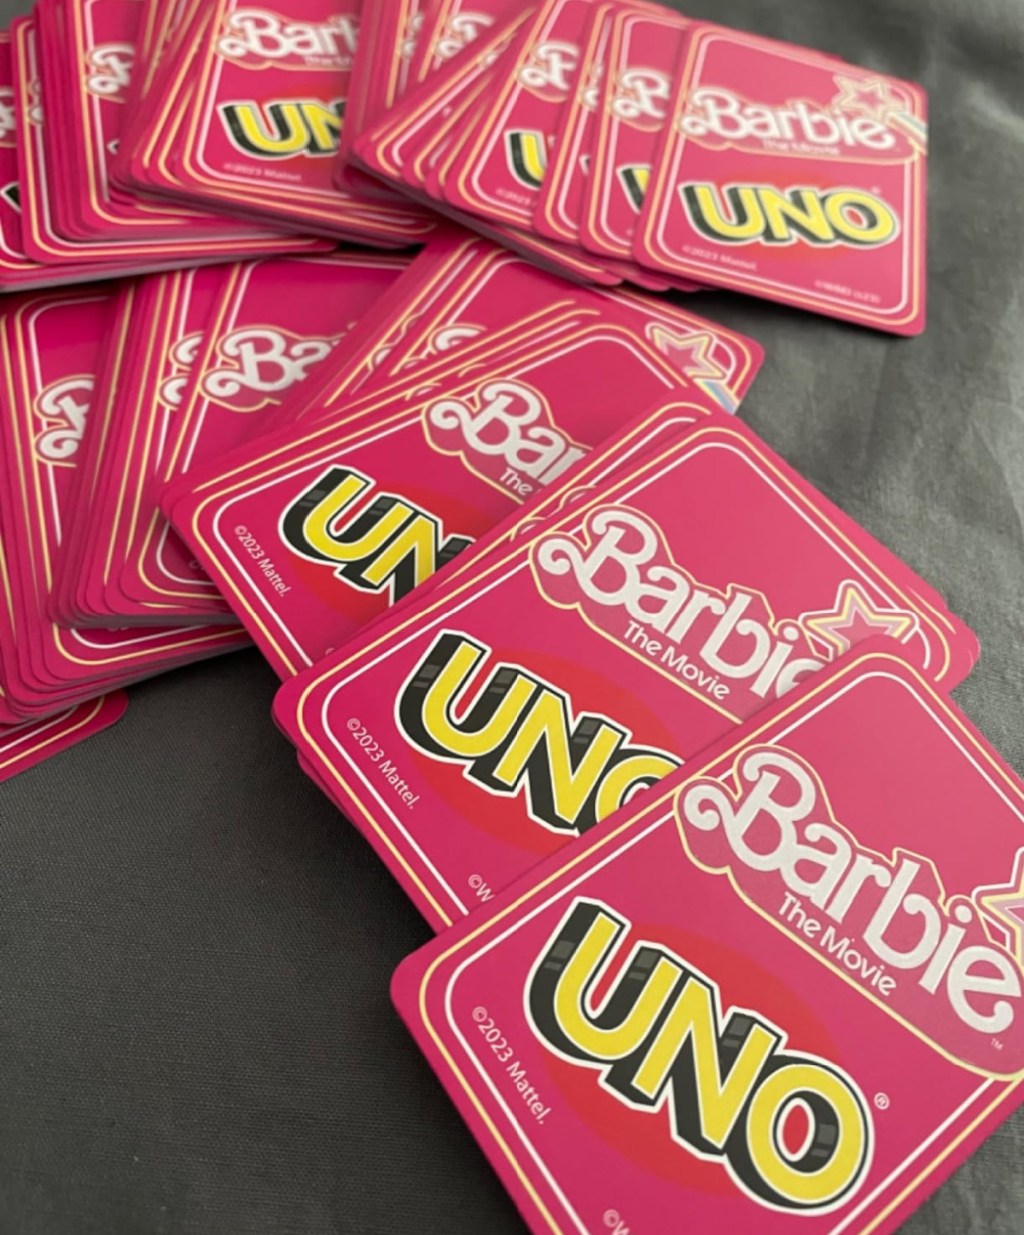 Barbie Uno Game cards